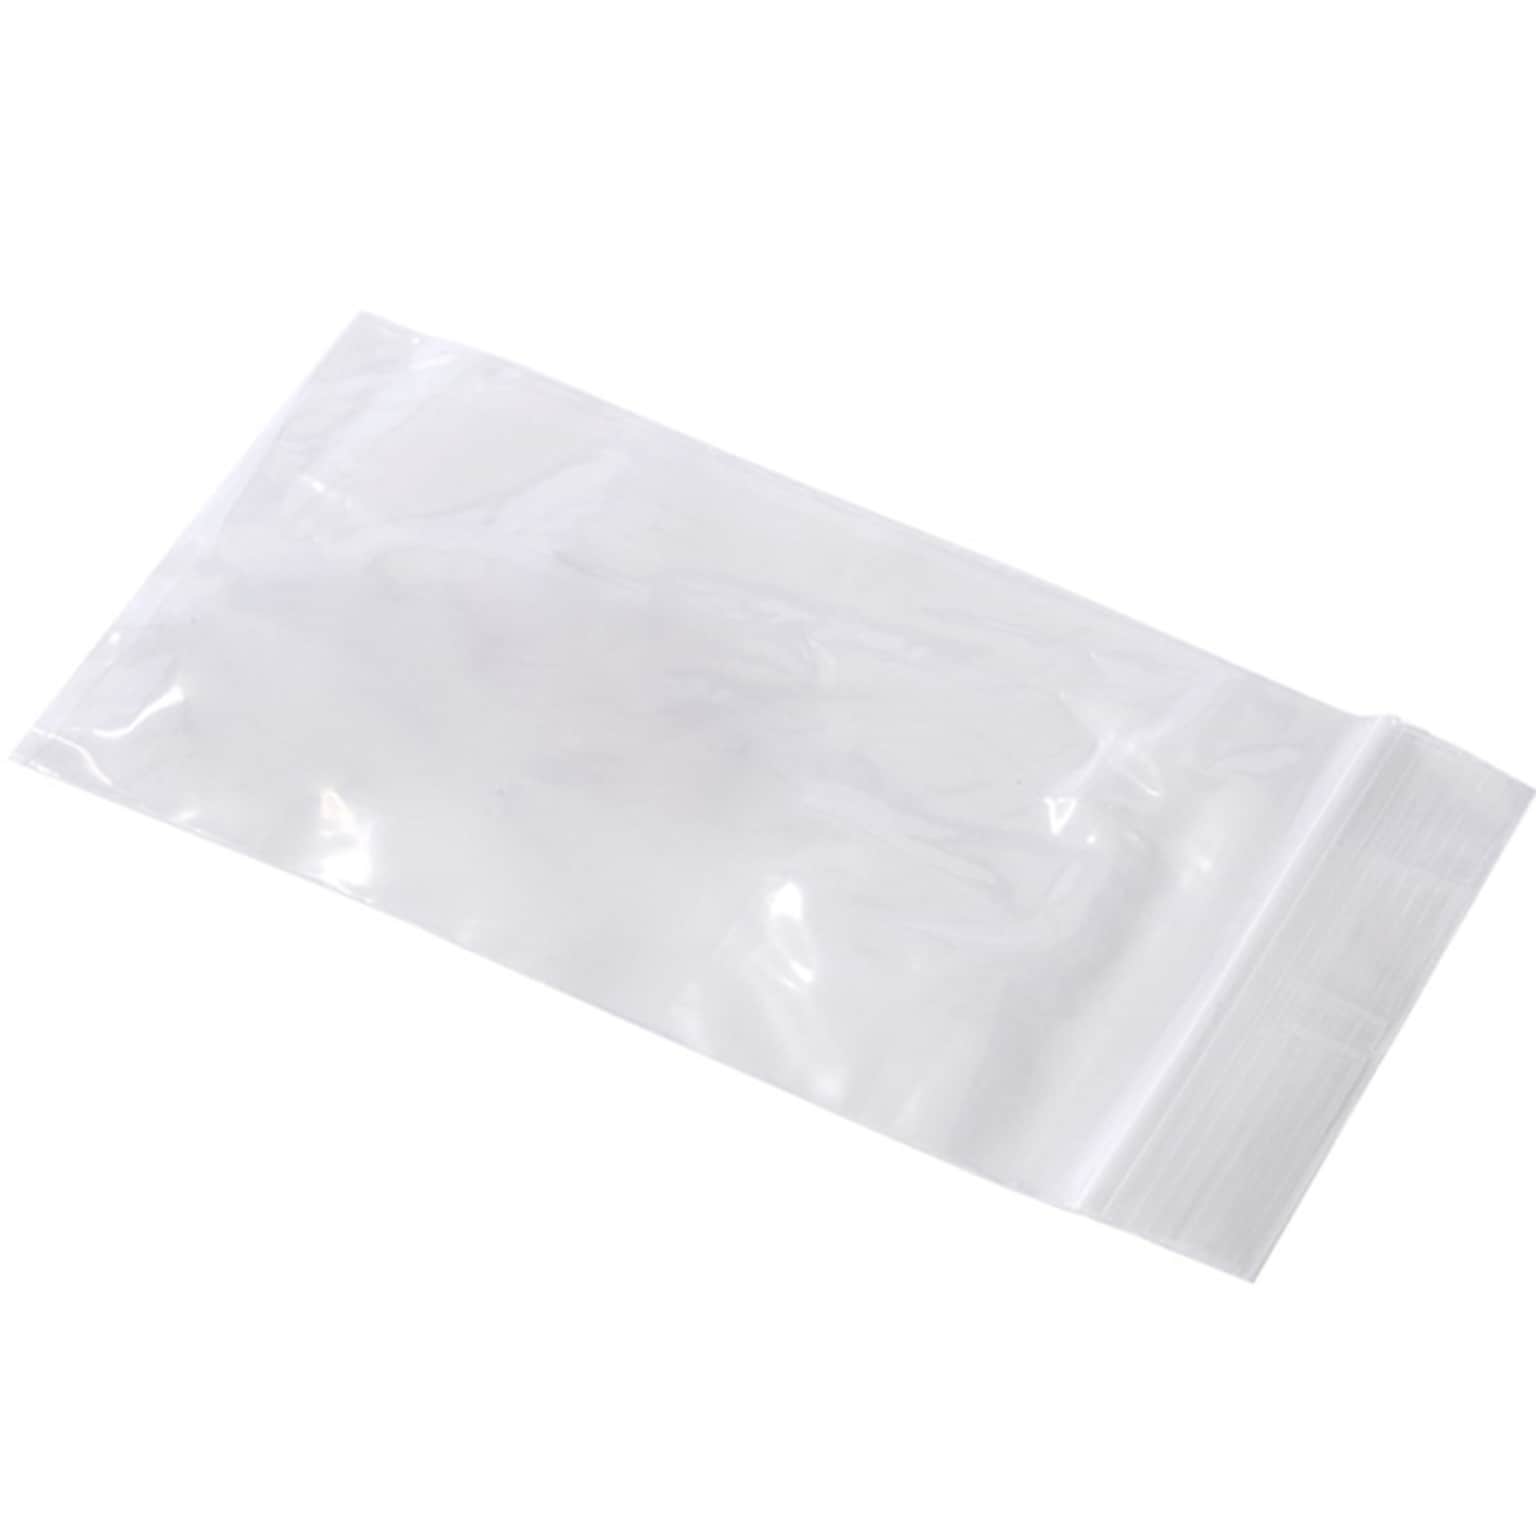 2 x 8 Reclosable Poly Bags, 2 Mil, Clear, 1000/Carton (3535A)